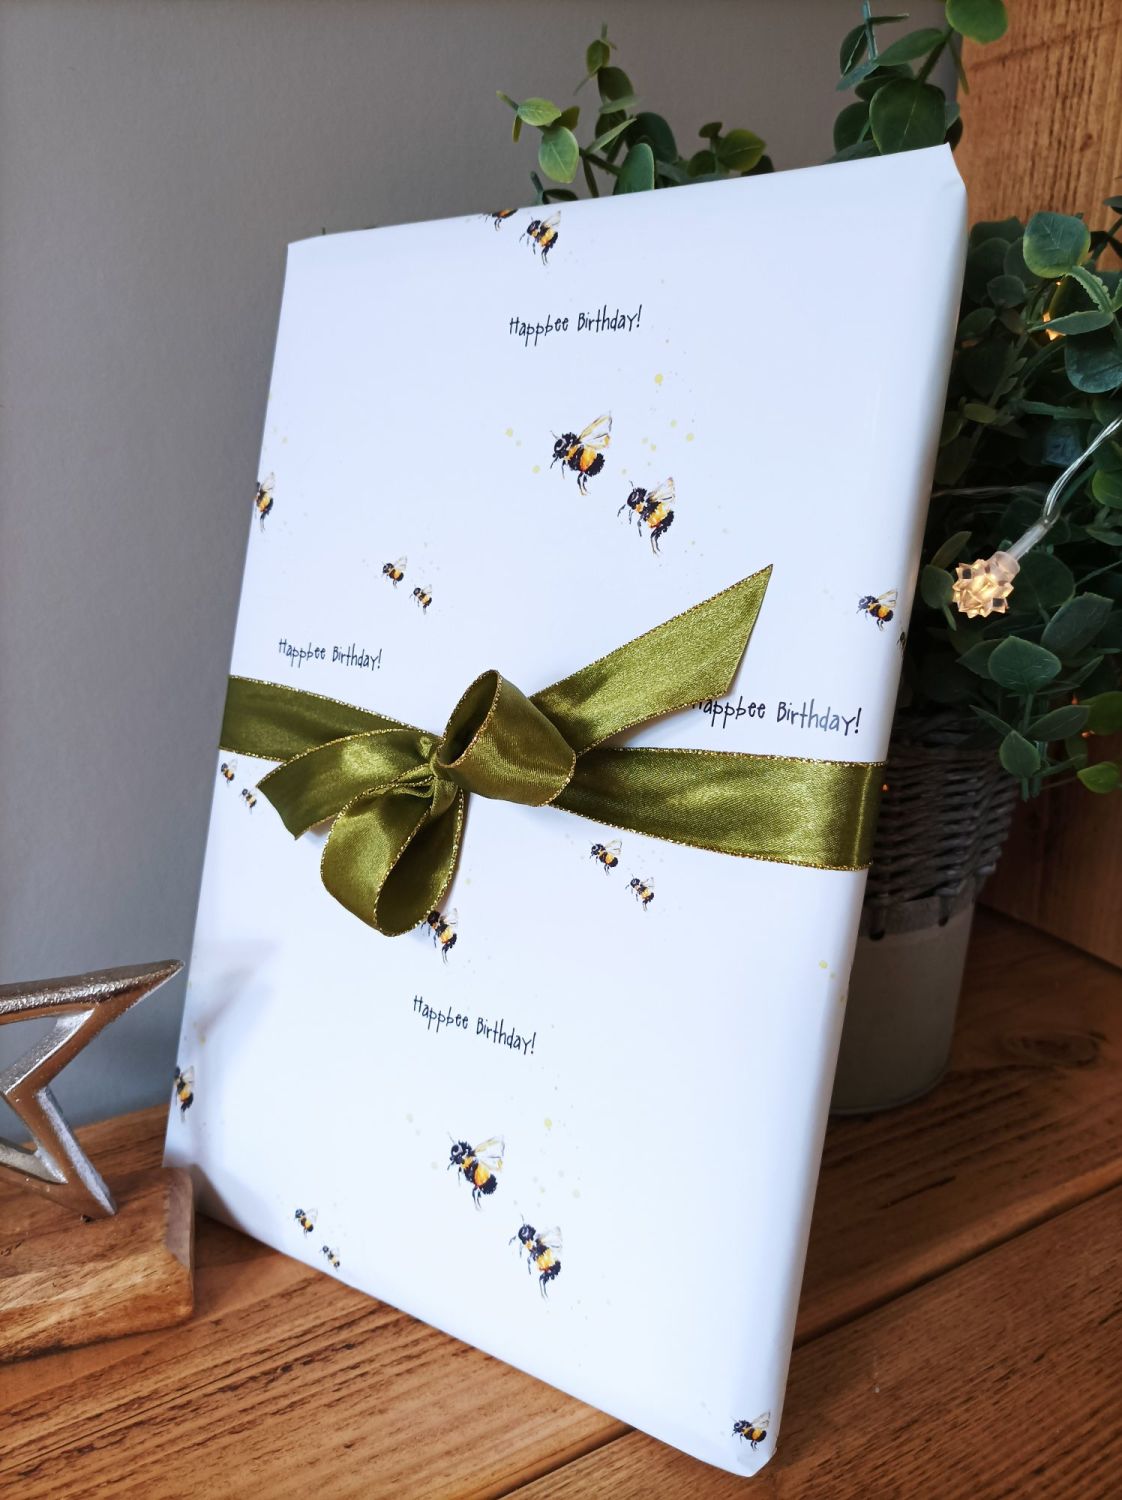 Happbee Birthday! - Wrapping paper